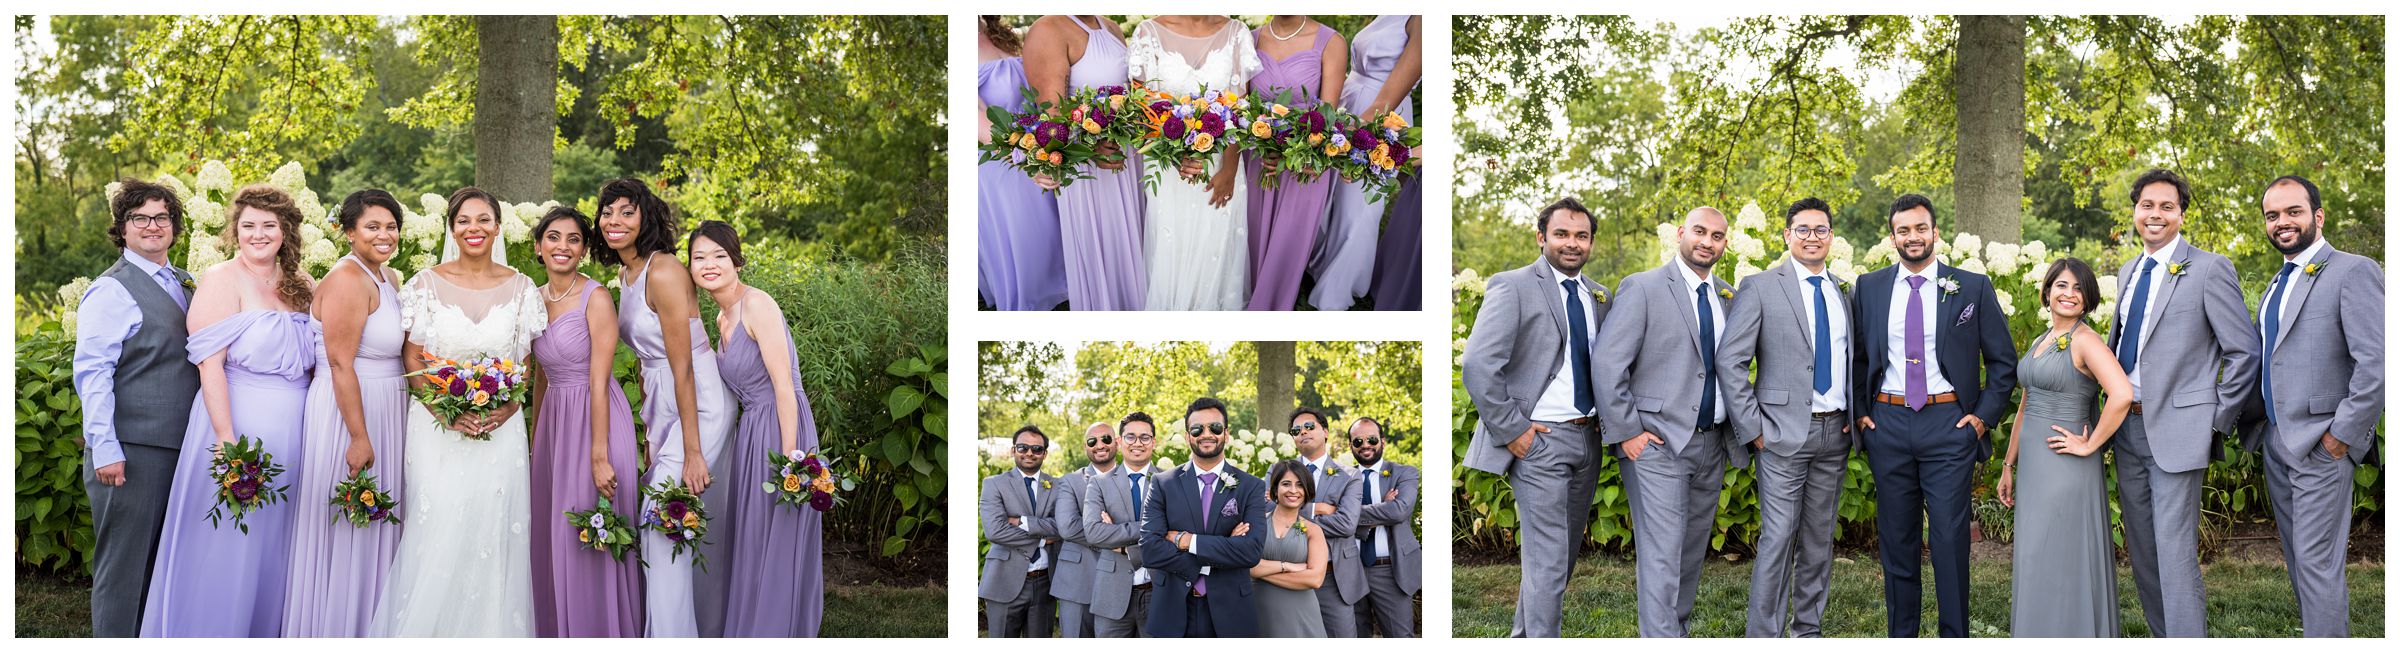 Diverse co-ed mixed gender wedding party with groomswoman and bridesman wearing sunglasses and holding purple and gold bouquets